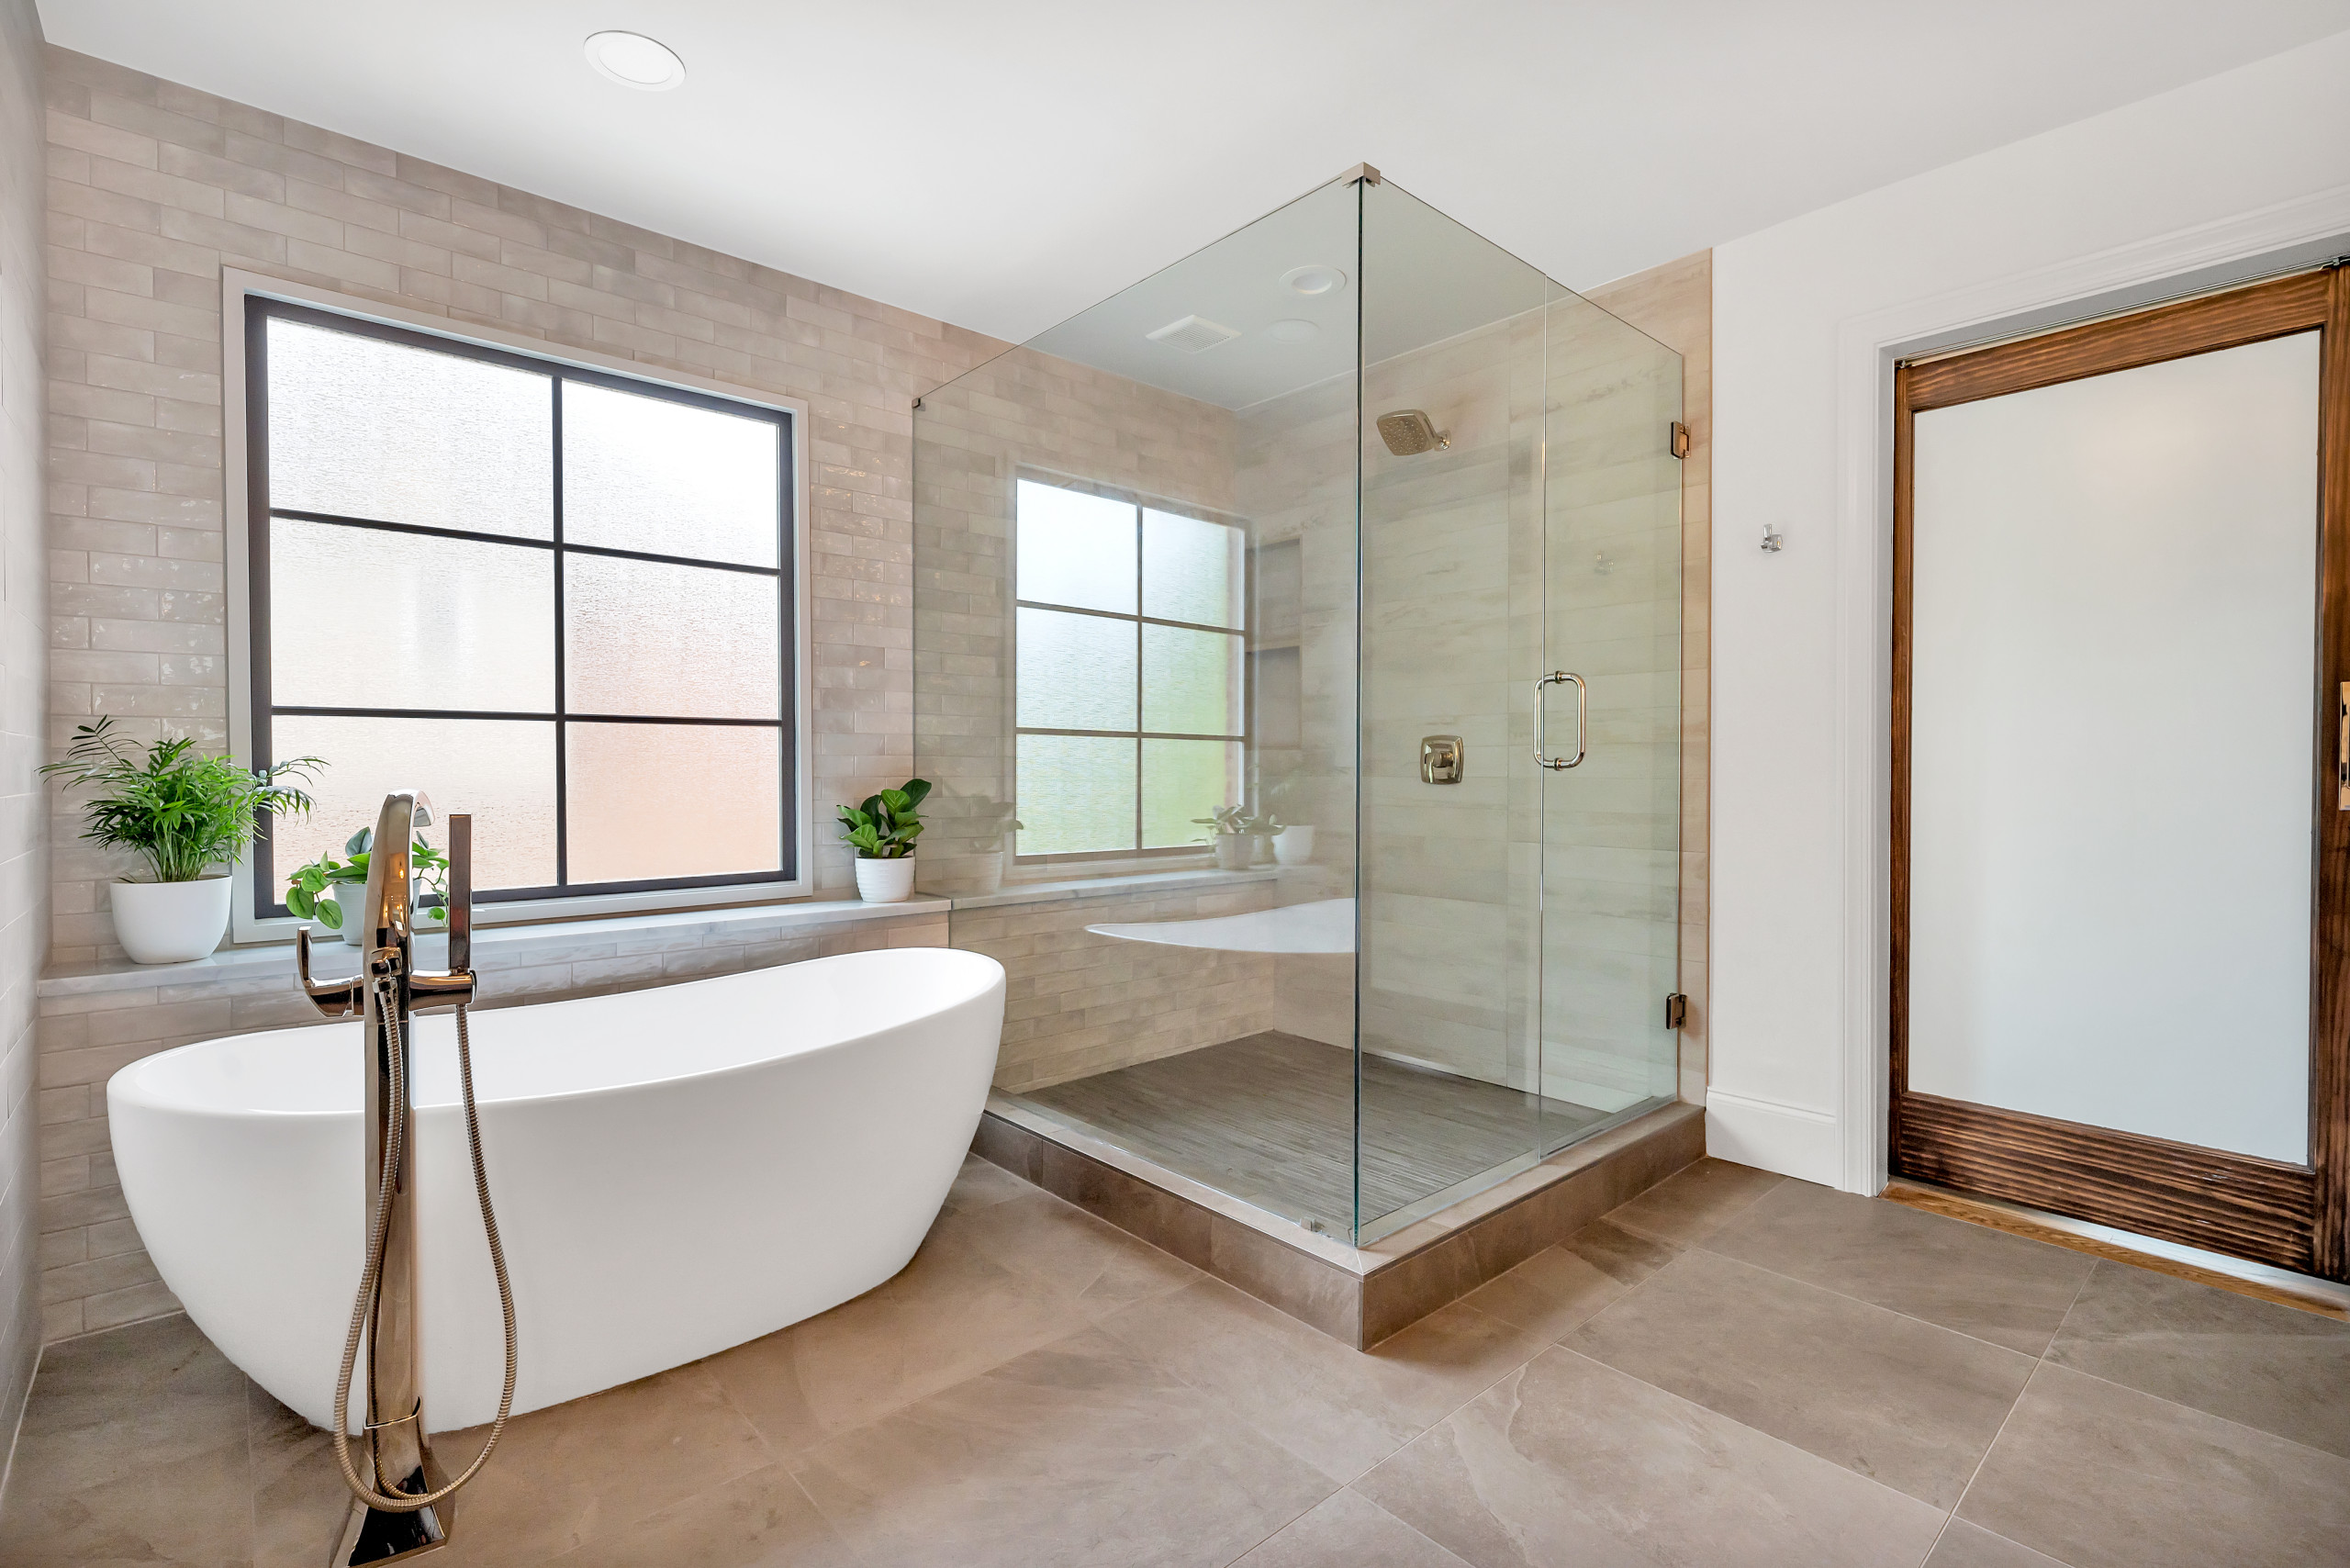 From Builder Grade From the 90’s to a Modern and Sophisticated Spa Feel